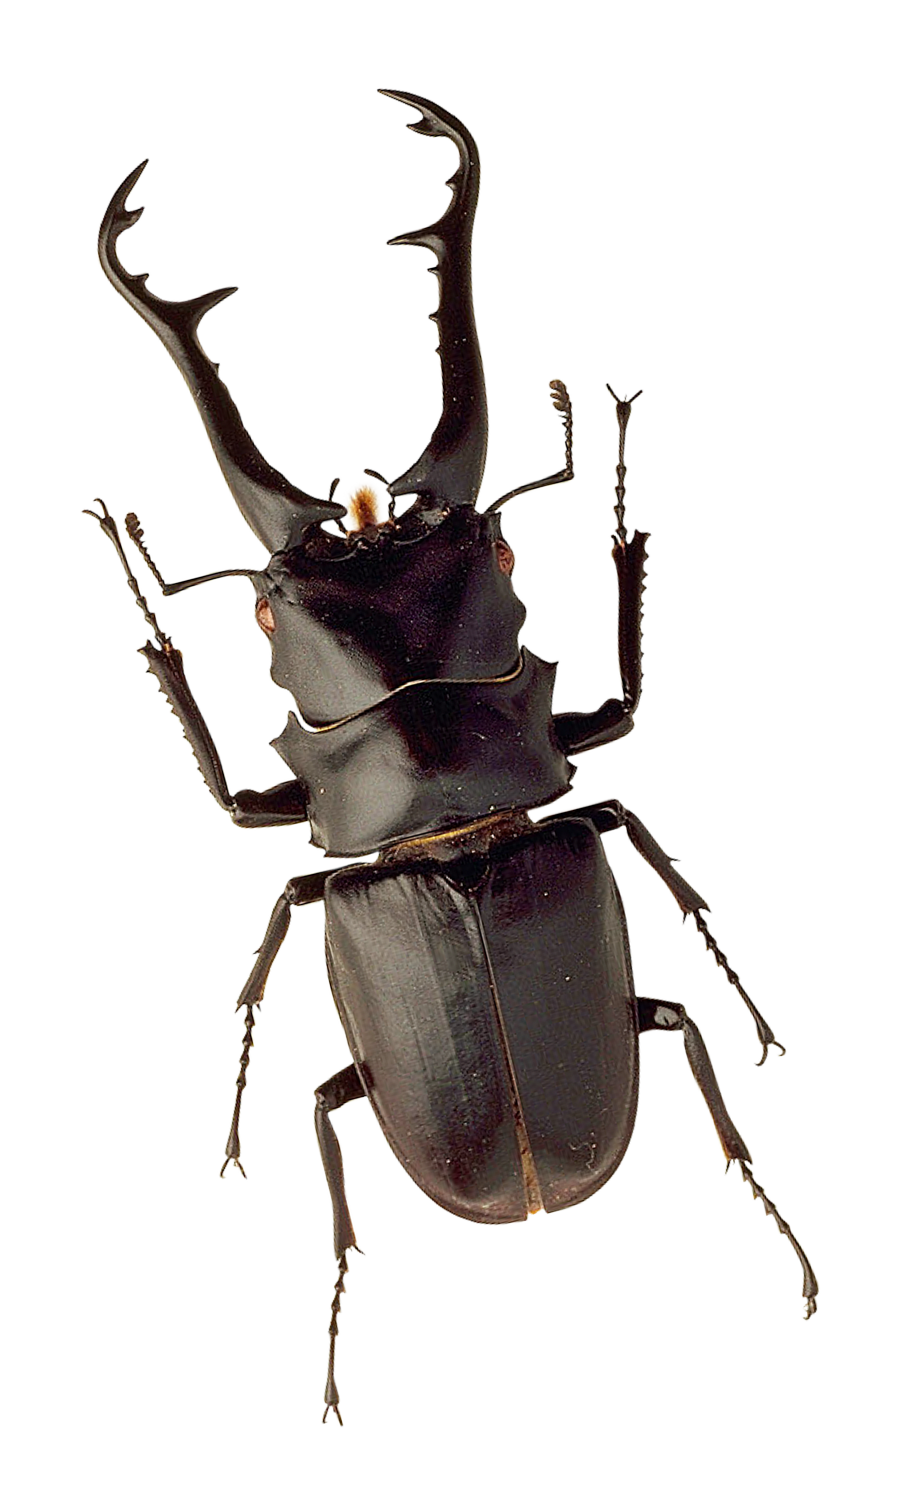 Insect PNG Image